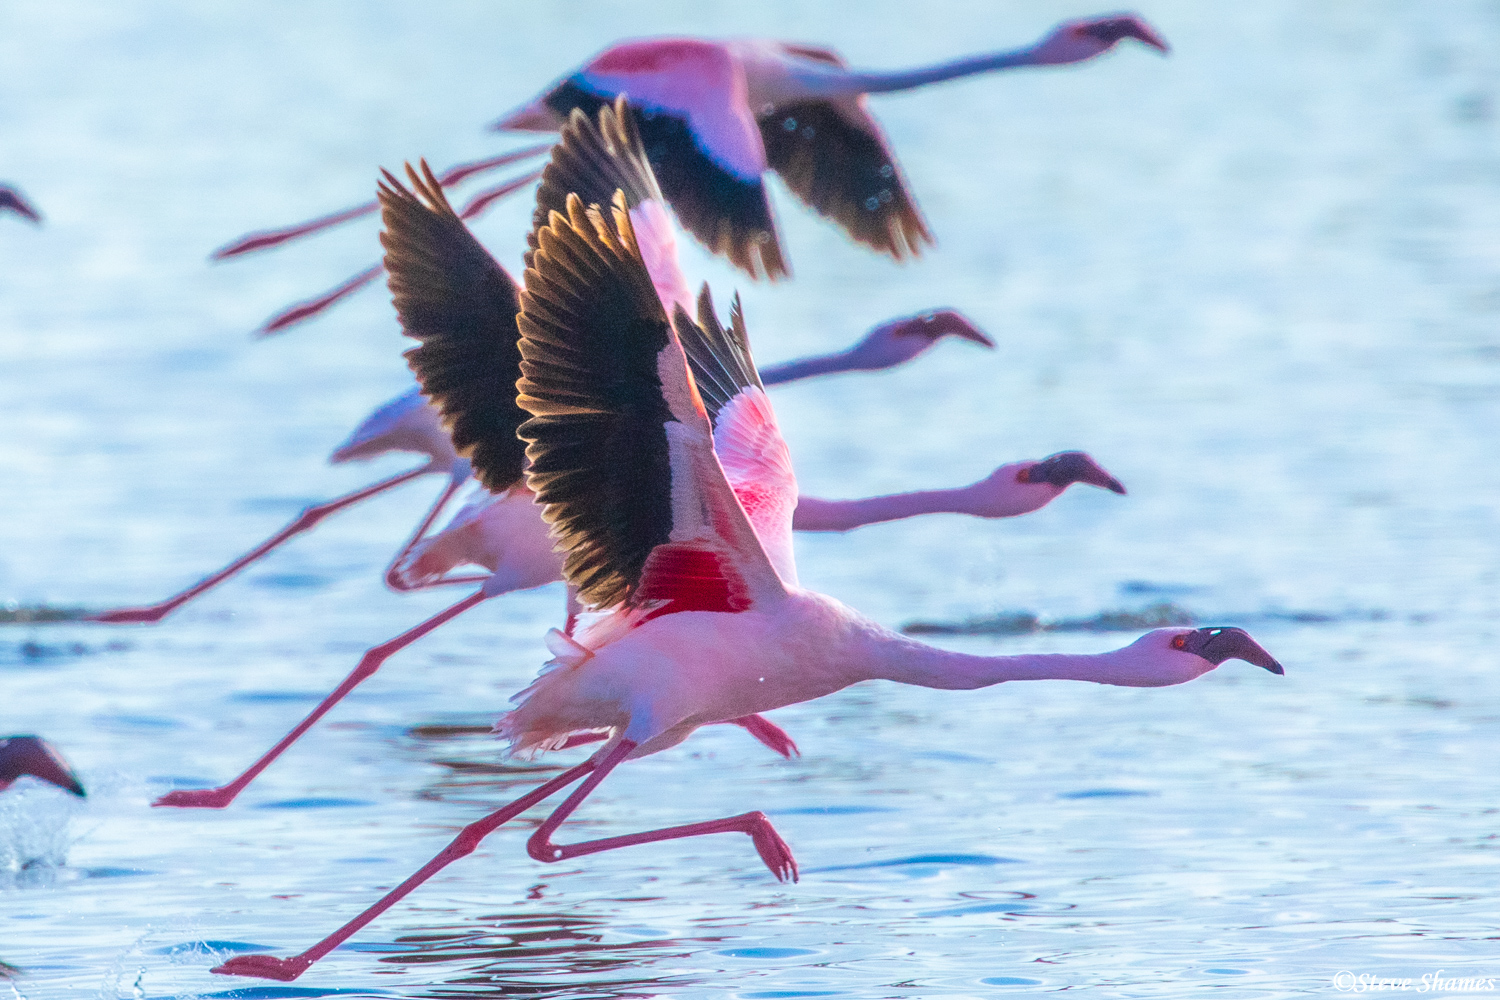 Its sometimes a struggle for flamingos to get airborne. They seem to run on the water.